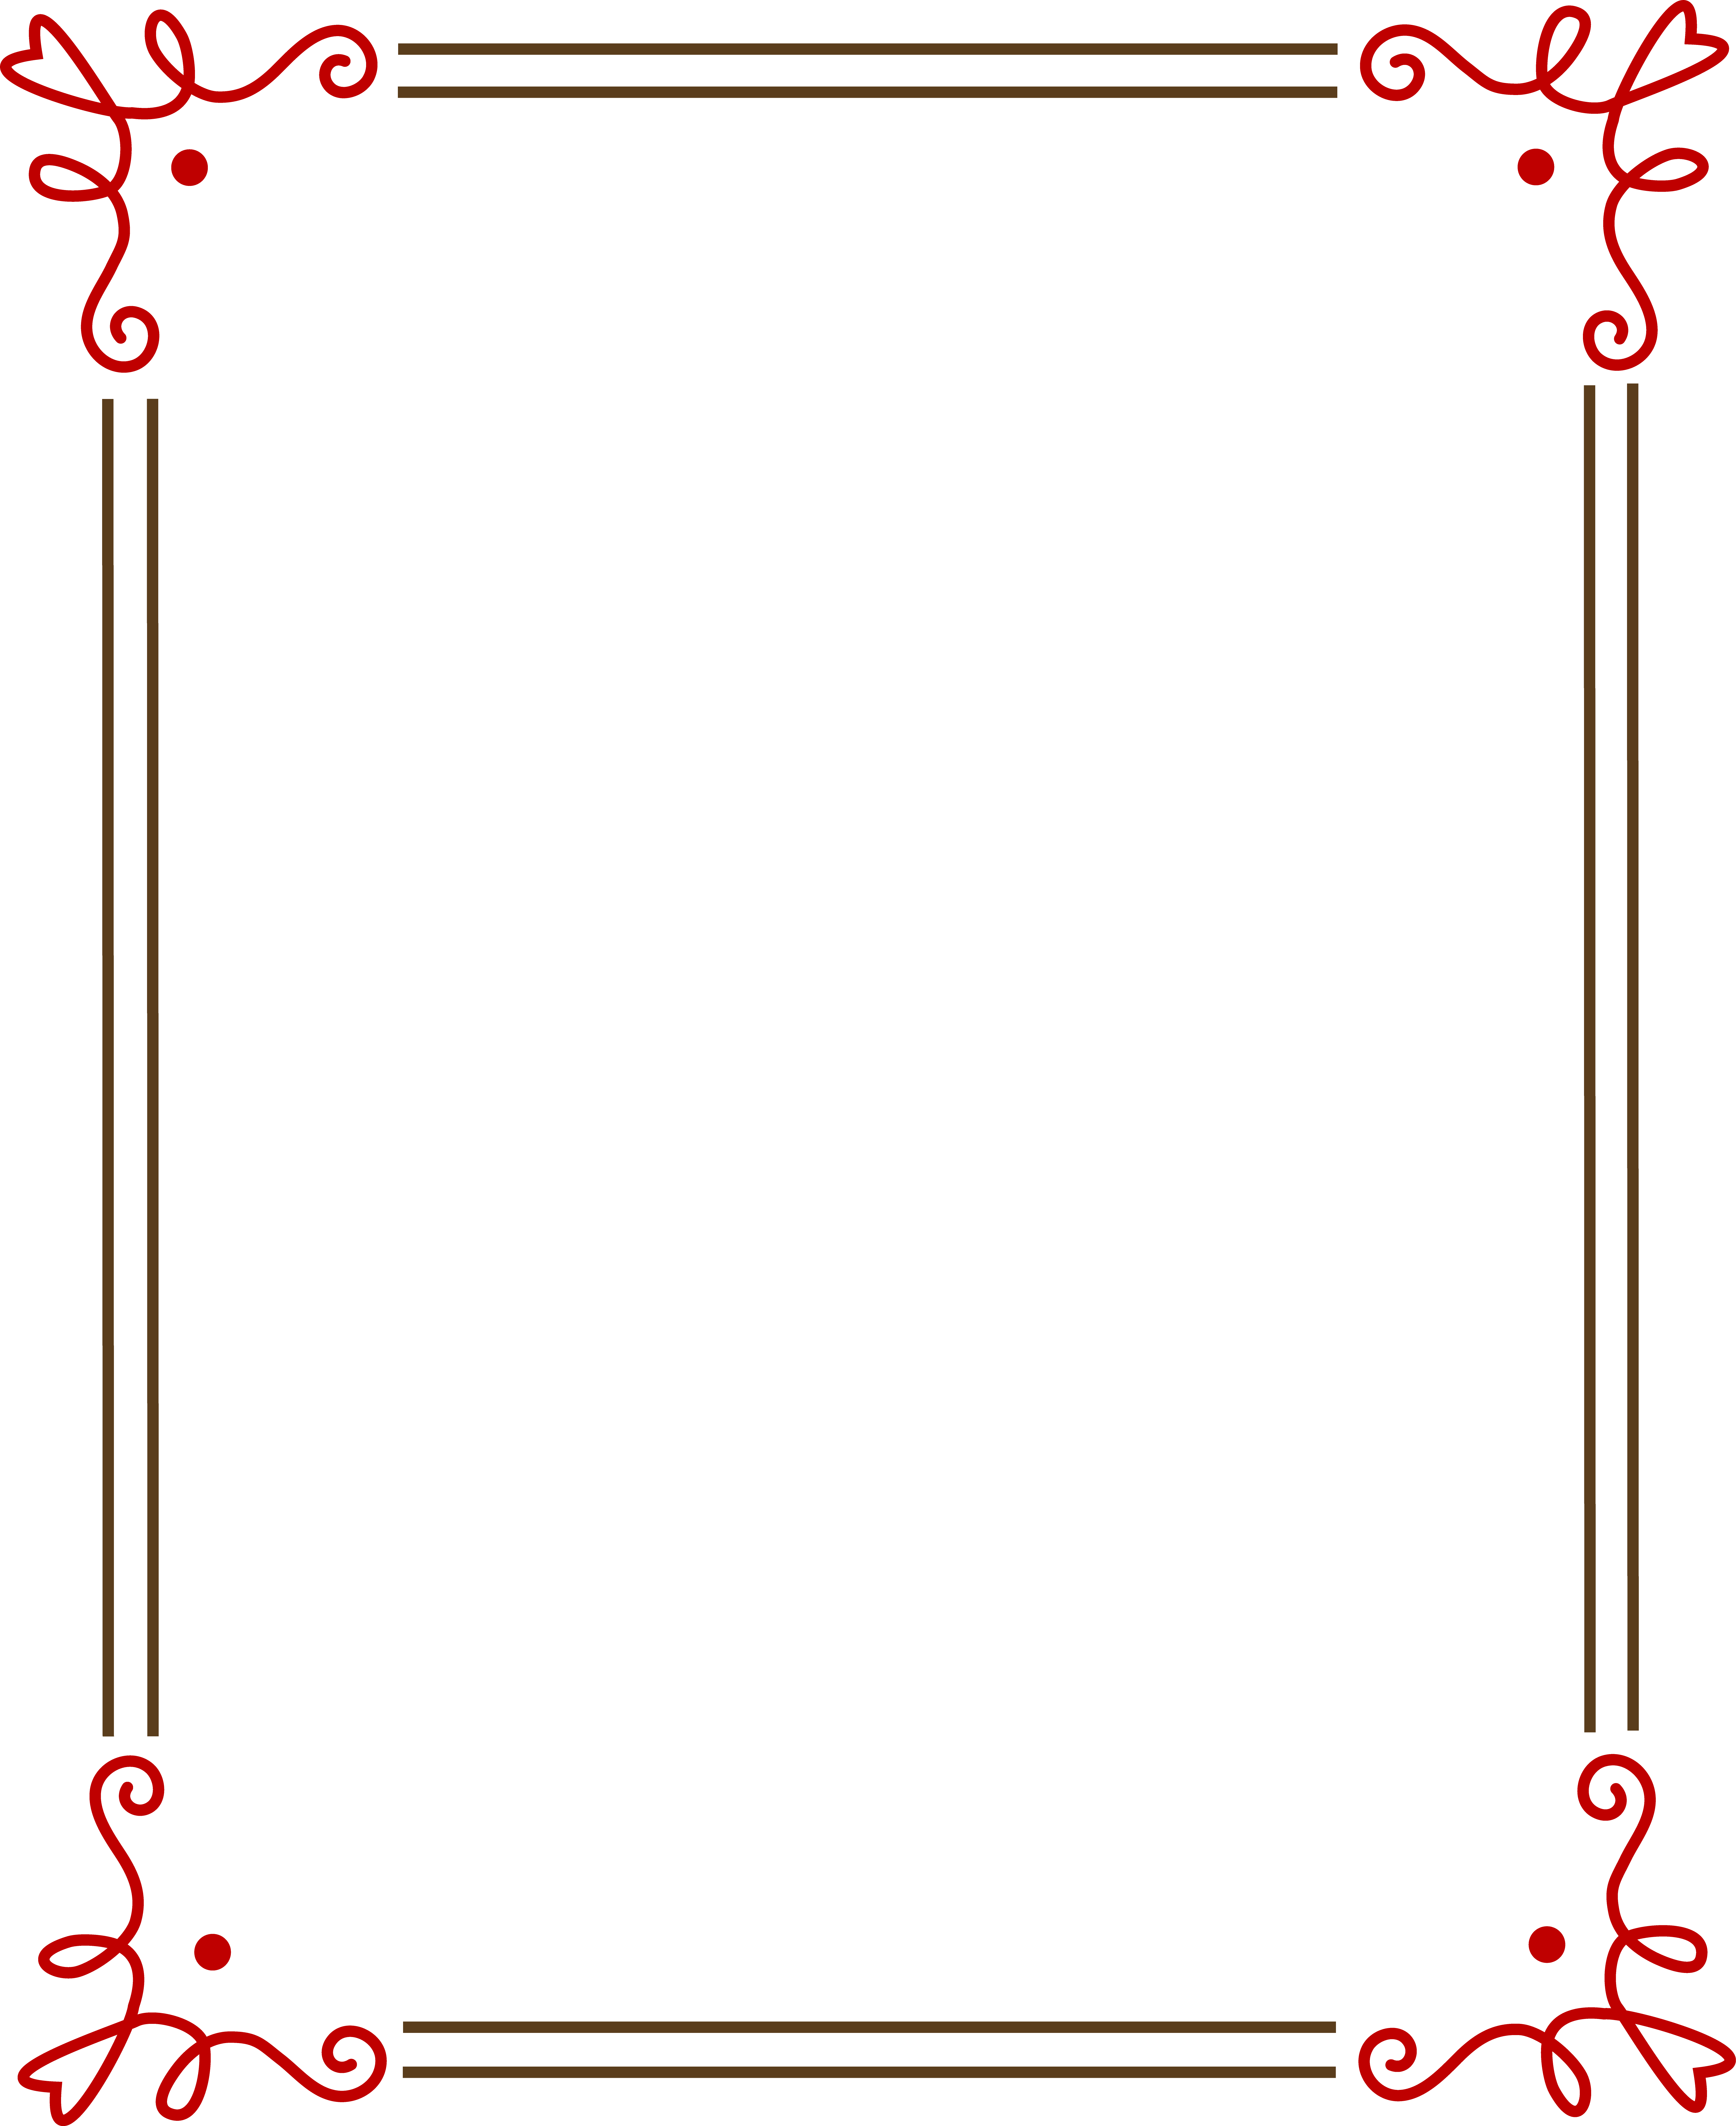 Lines Fancy Frame Clipart